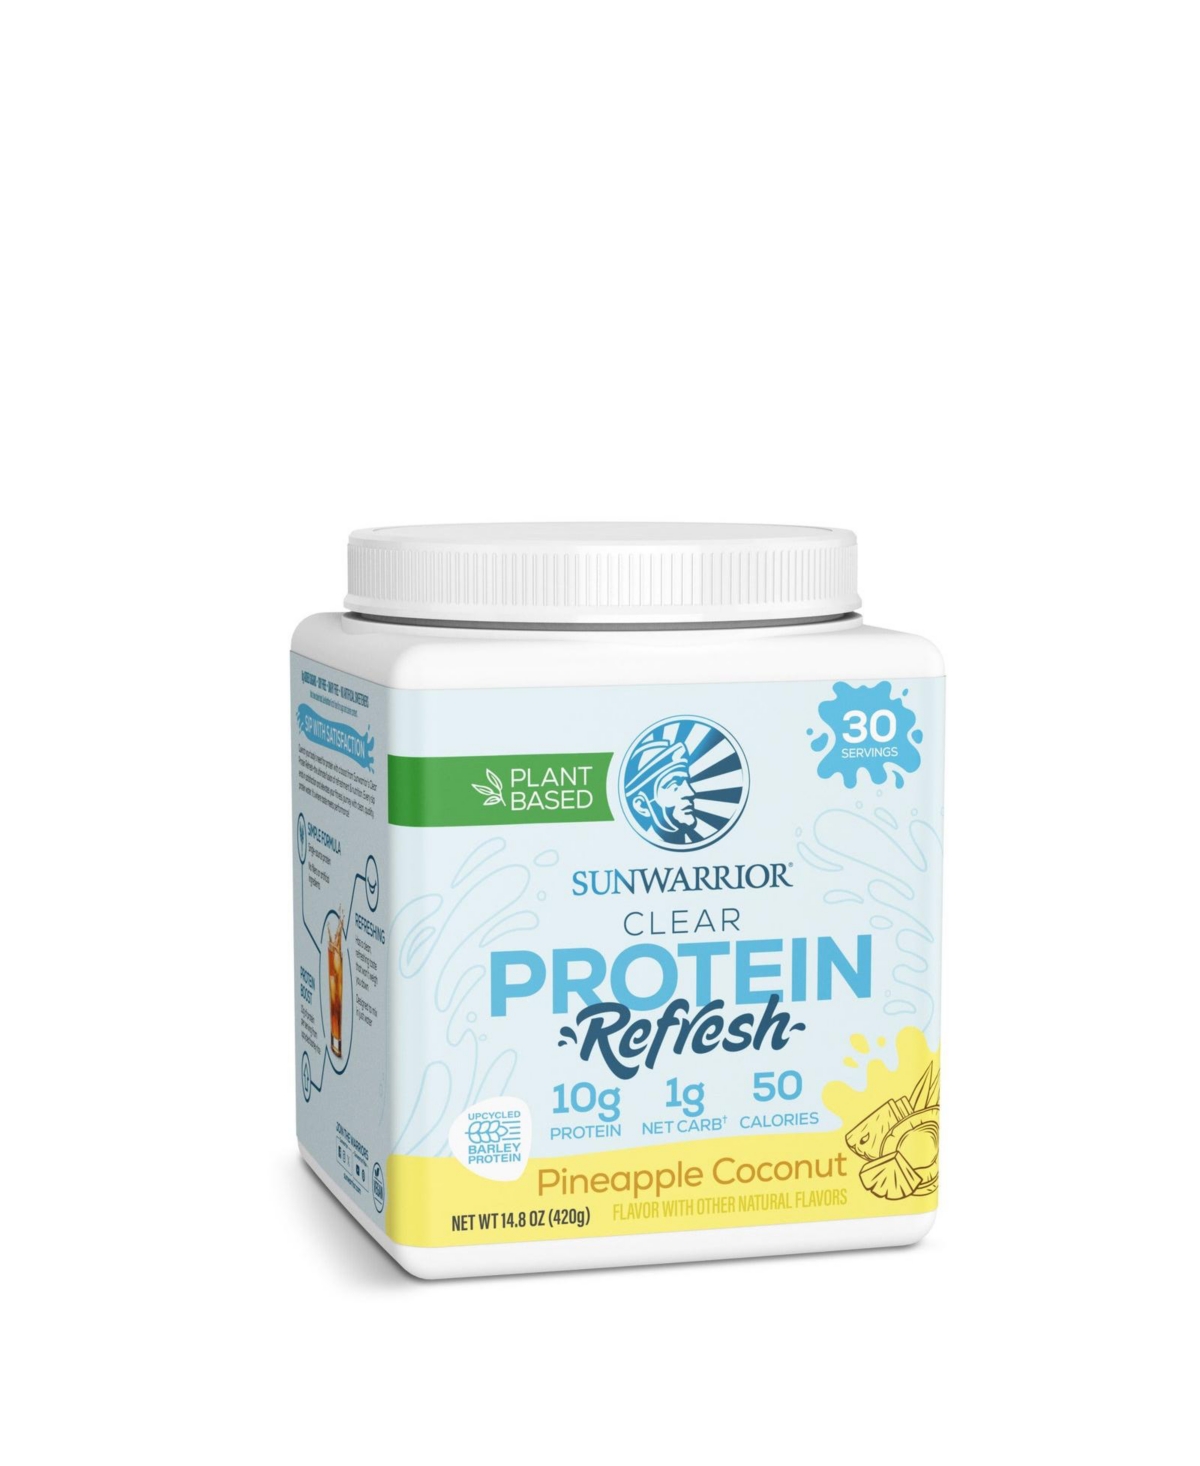 Clear Protein Refresh - Pineapple Coconut